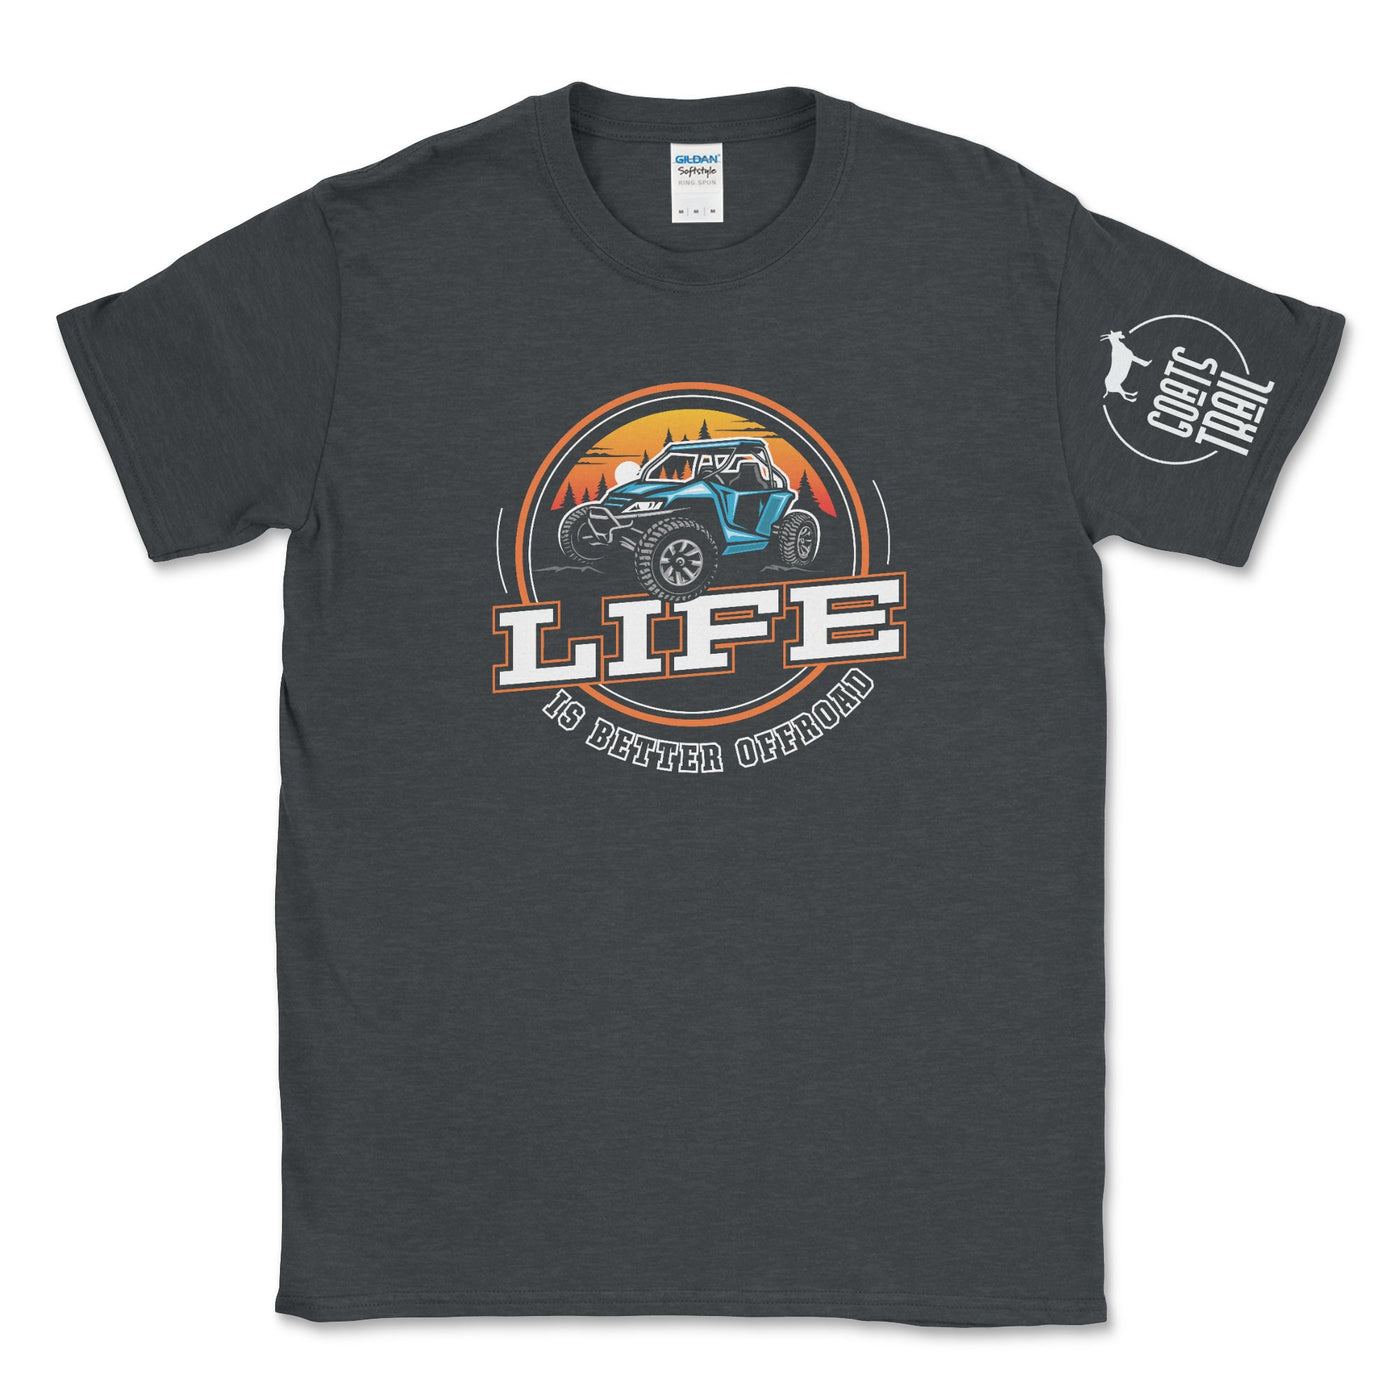 Life Is Better Offroad Shirt - Goats Trail Off-Road Apparel Company